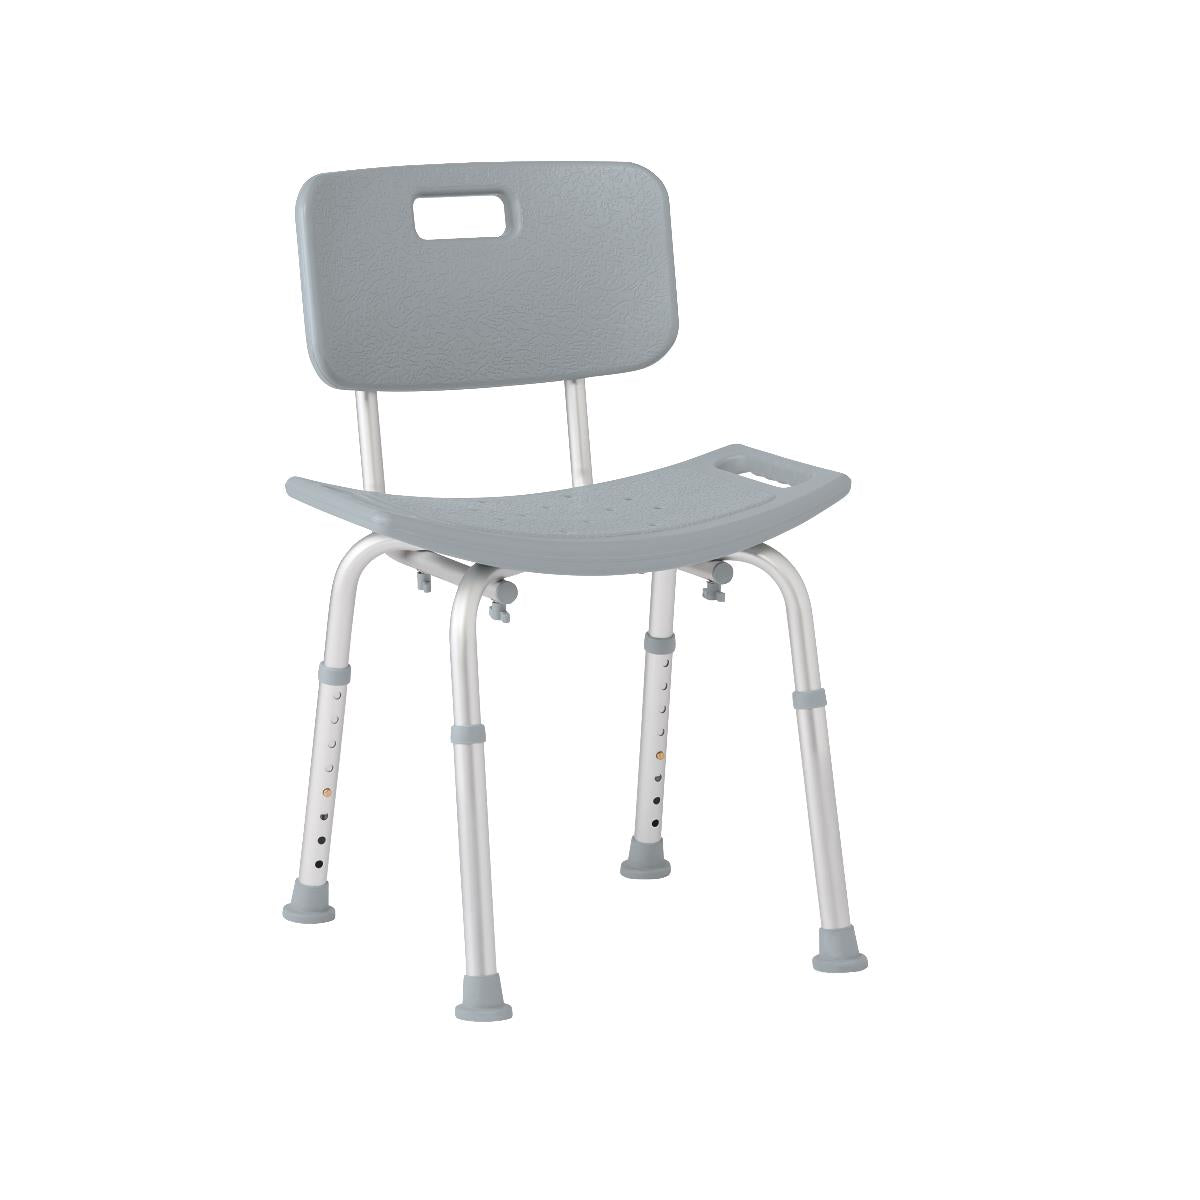 Easy Care Shower Chair w/ Back